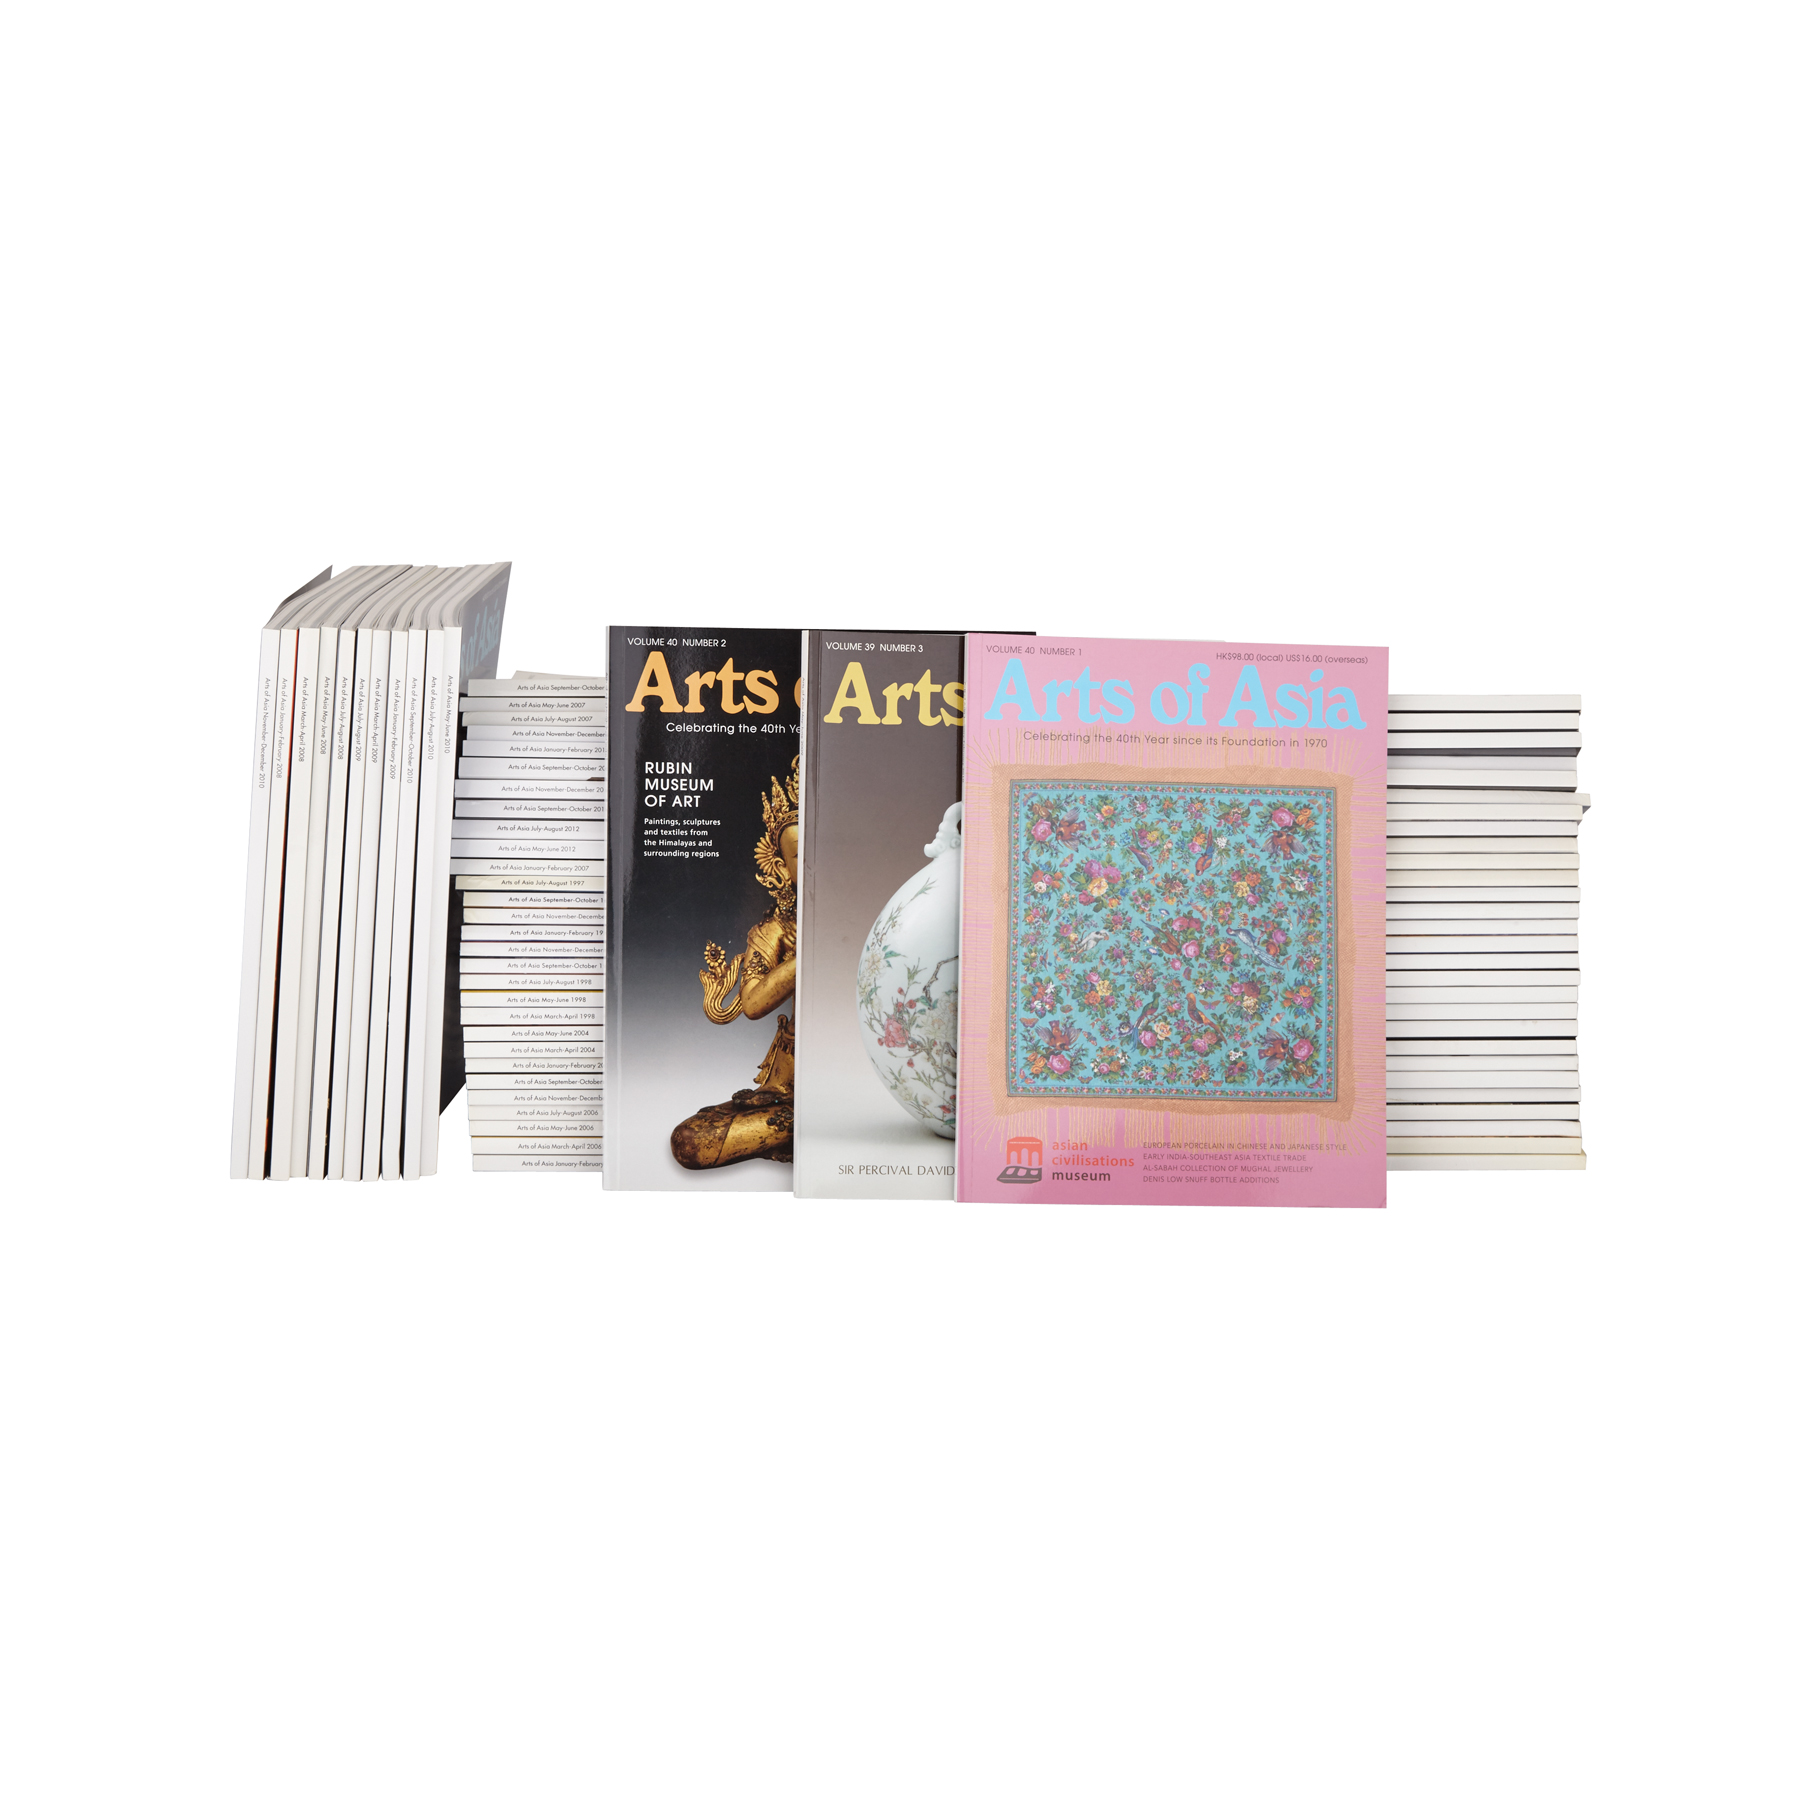 Seventy-One Issues of “Arts of Asia”